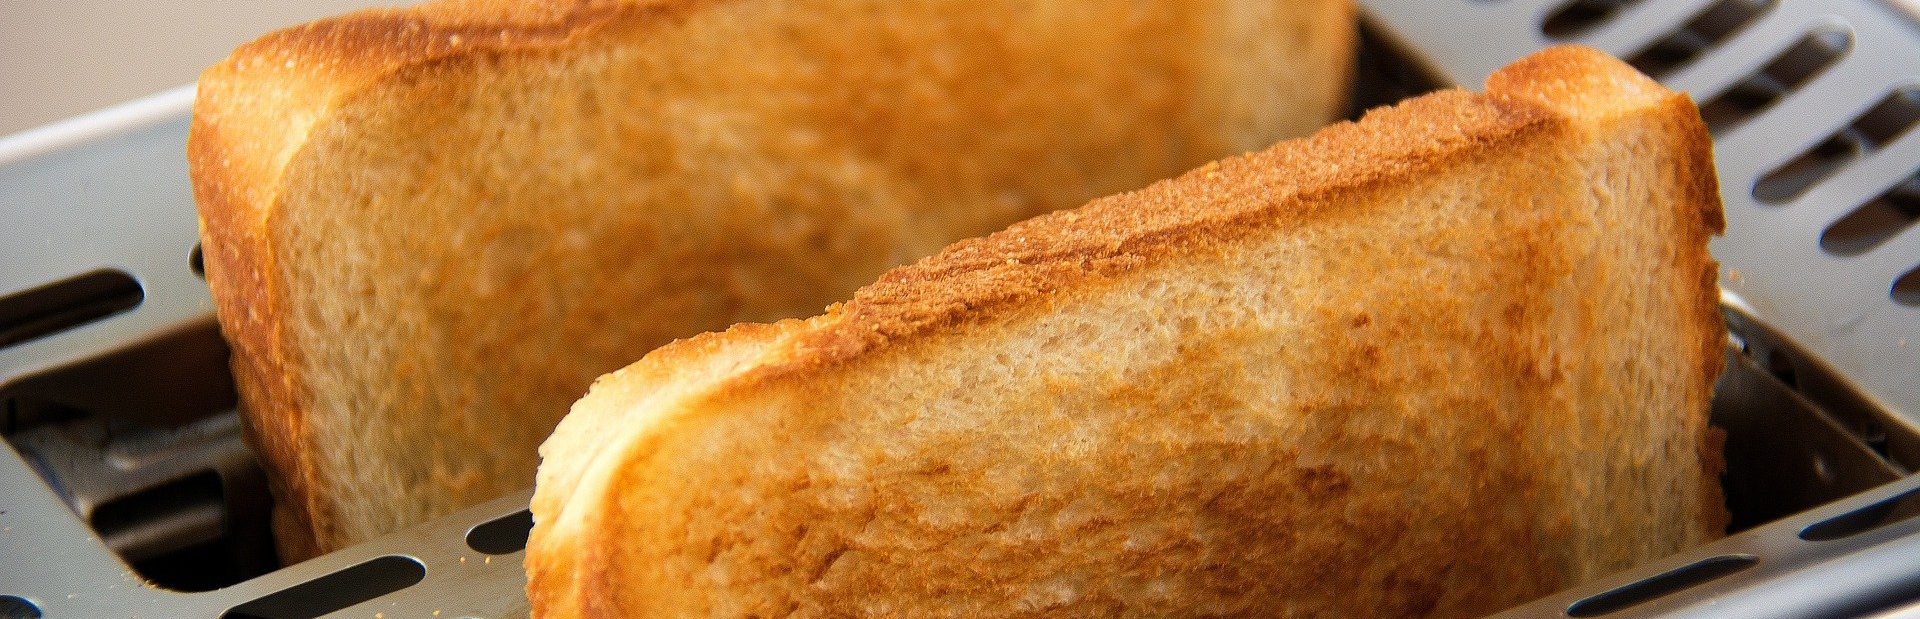 image of a toaster with toast